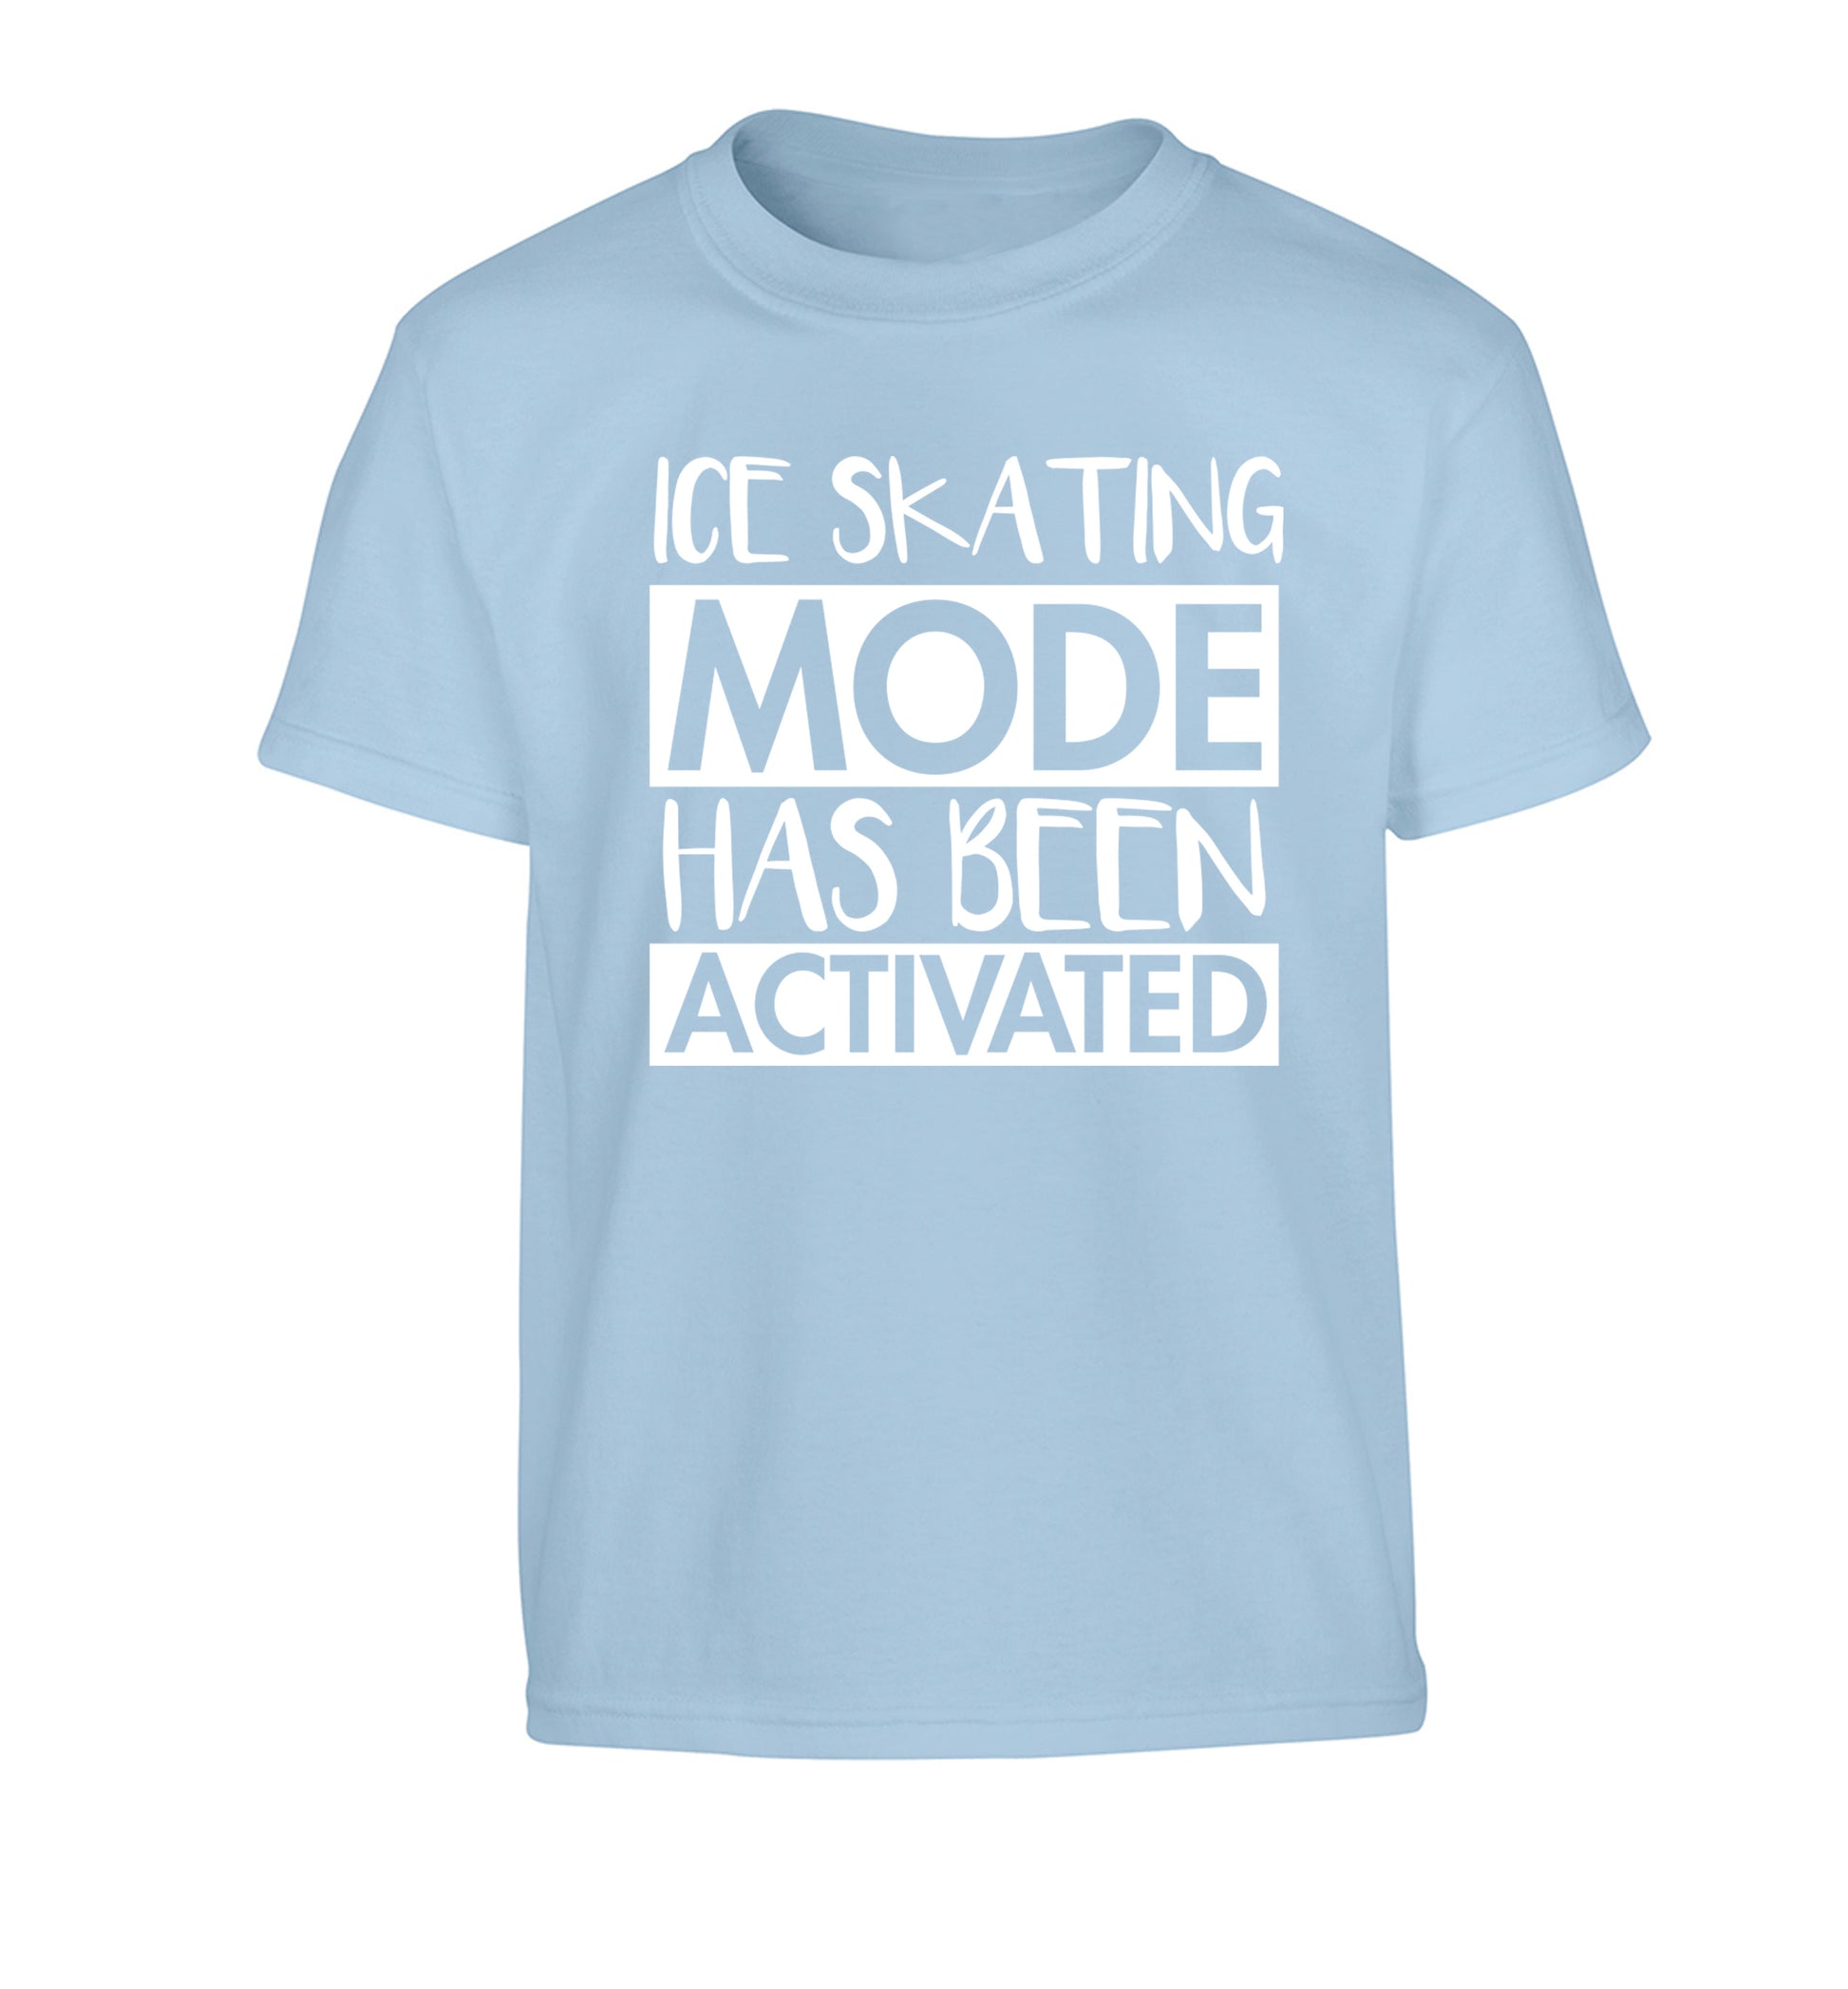 Ice skating mode activated Children's light blue Tshirt 12-14 Years